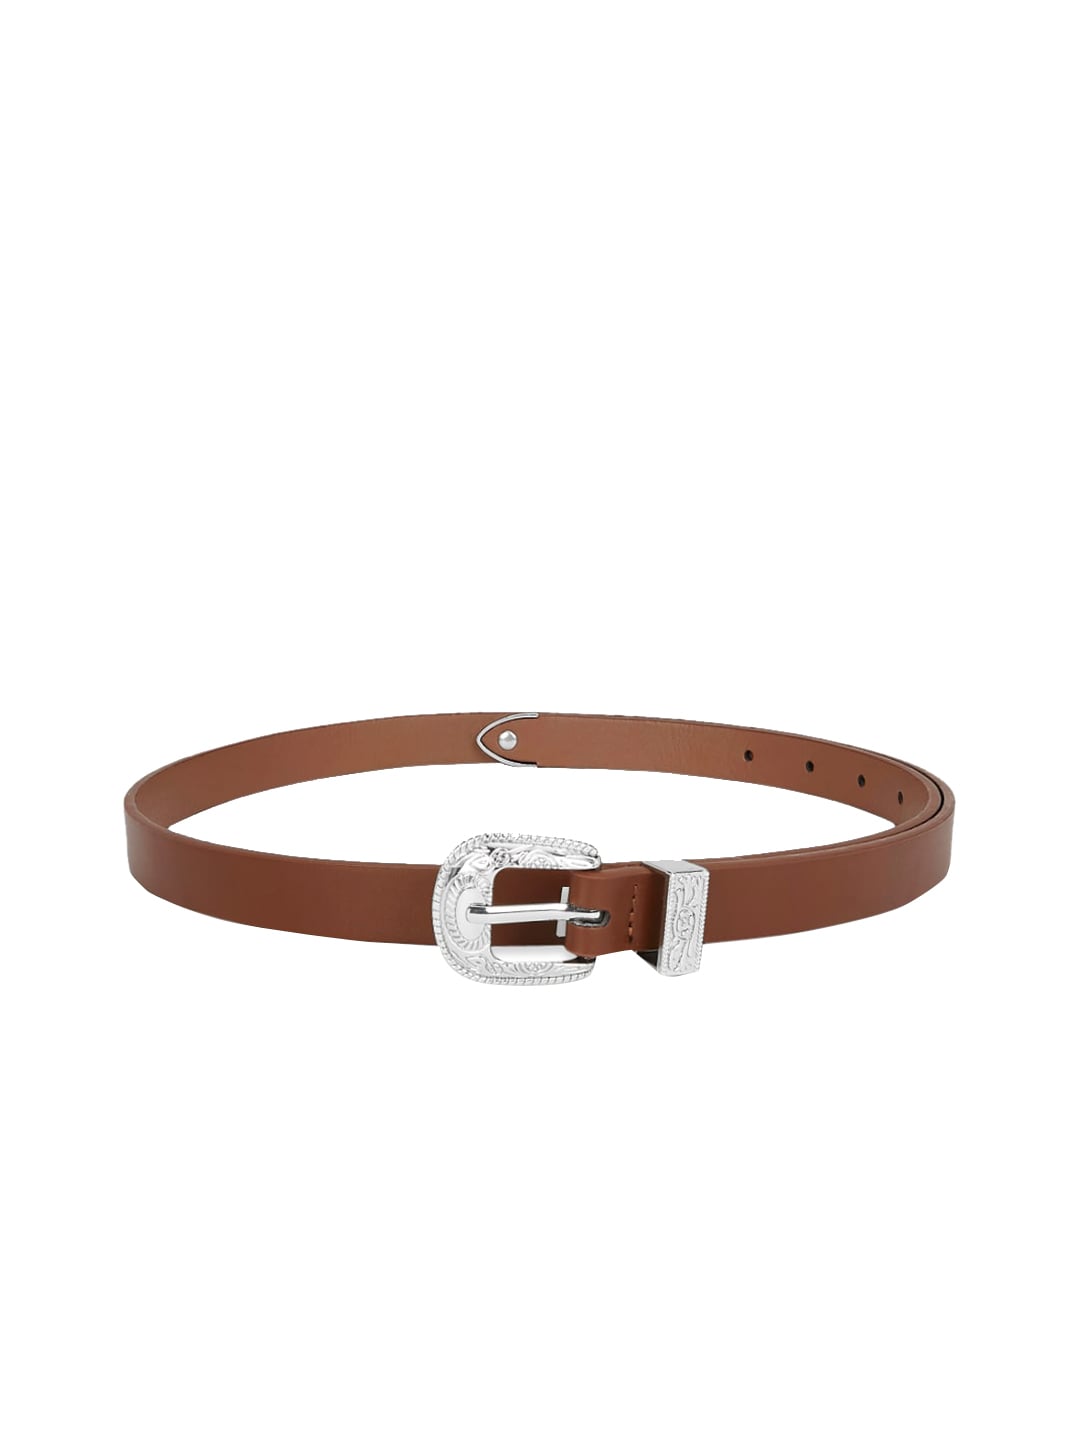 Forever Glam by Pantaloons Women Brown PU Belt Price in India